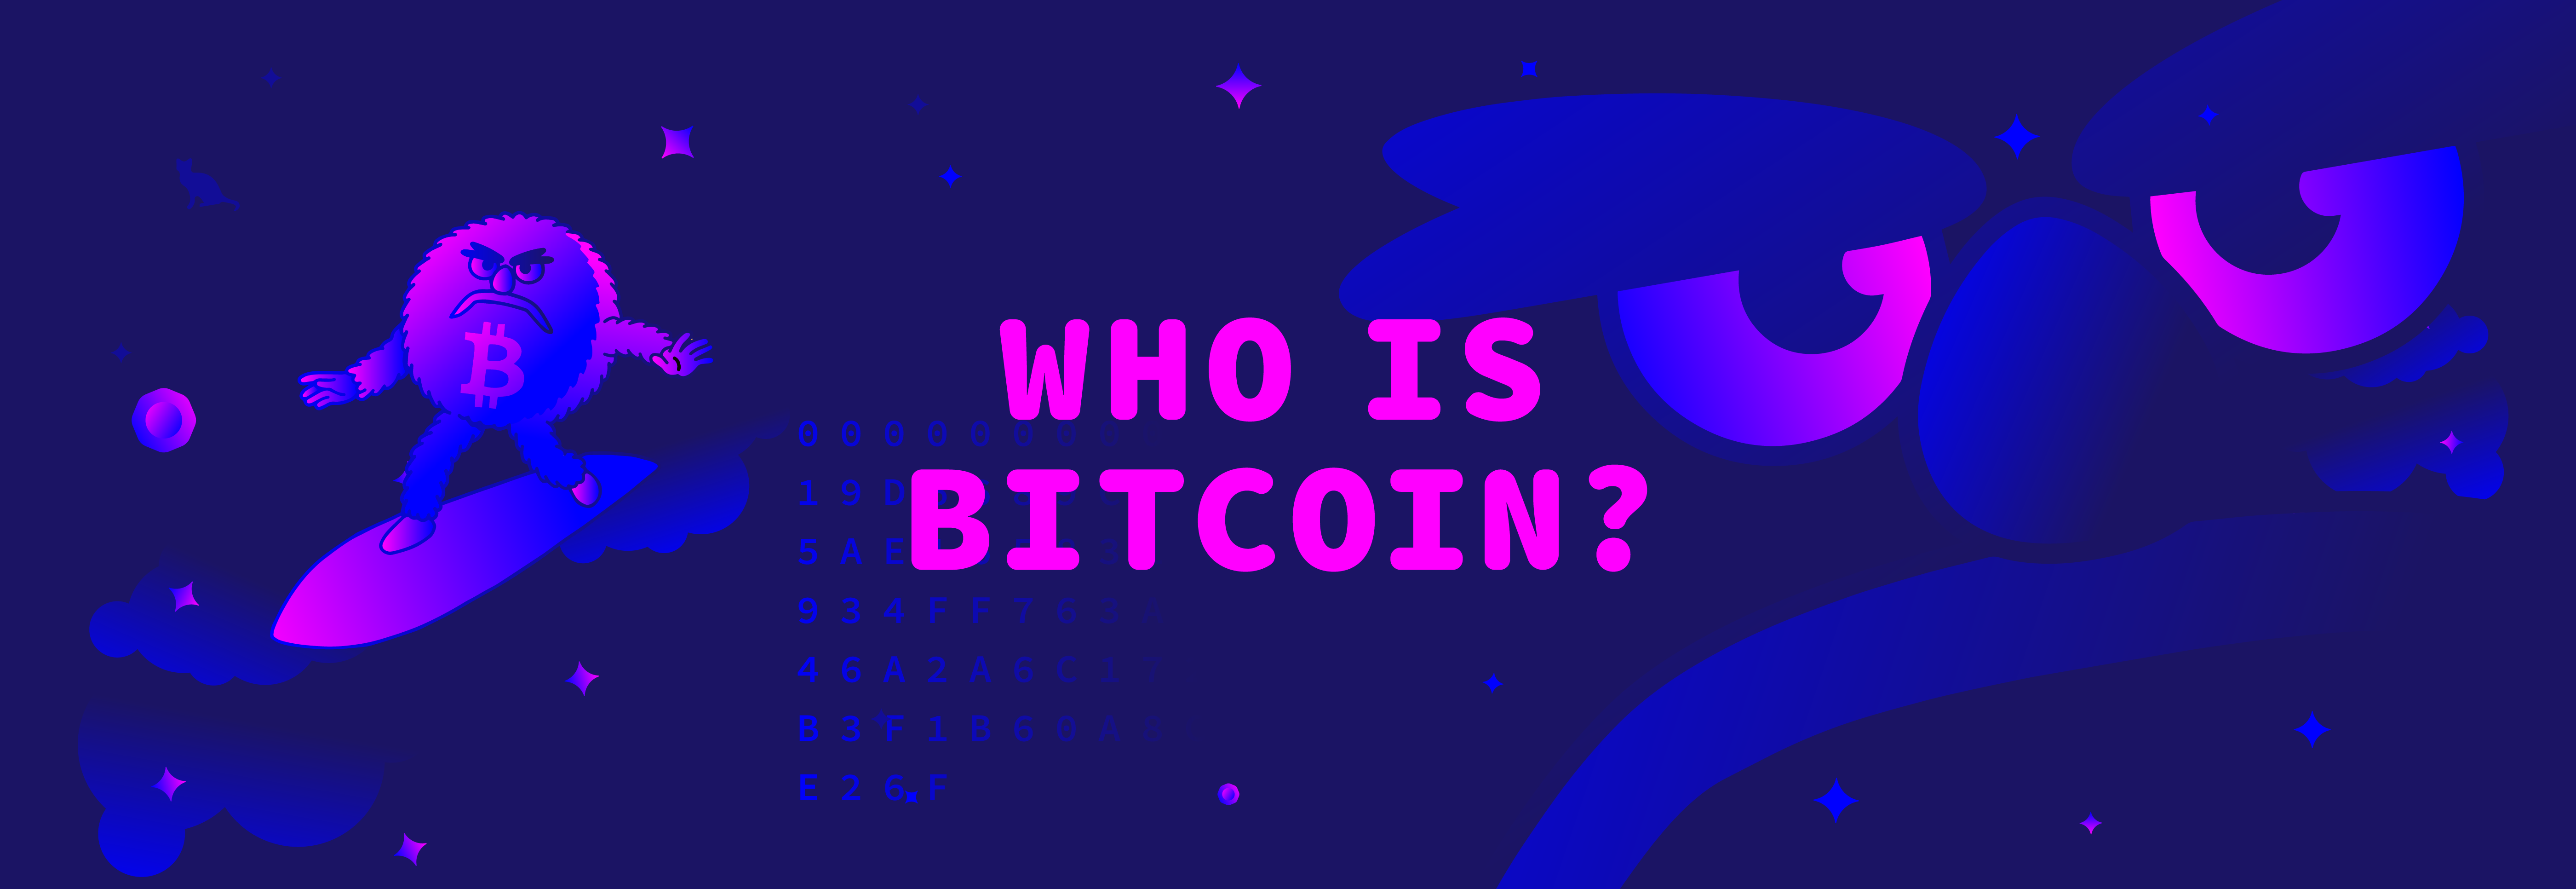 Who is Bitcoin?